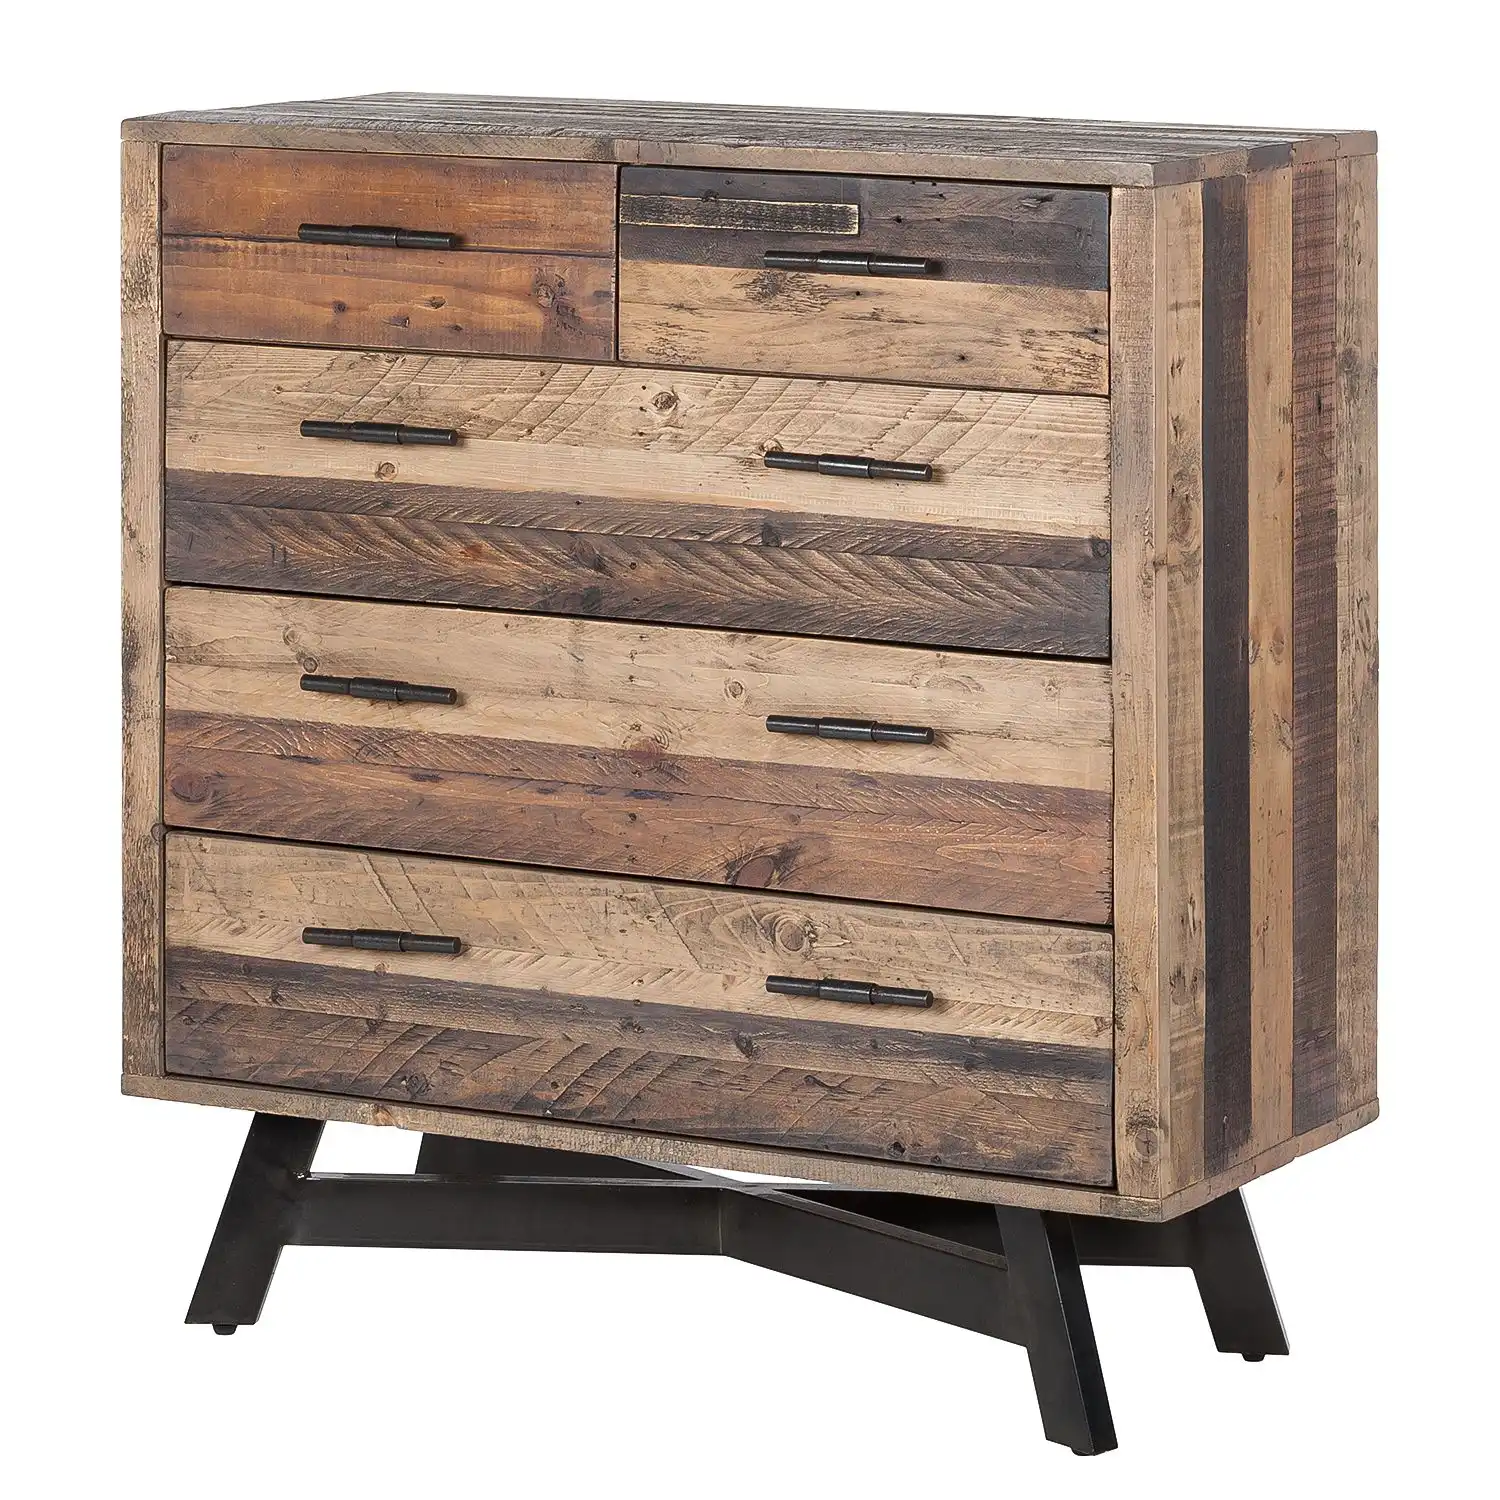 Reclaimed Wood Cabinet with 5 drawers - popular handicrafts